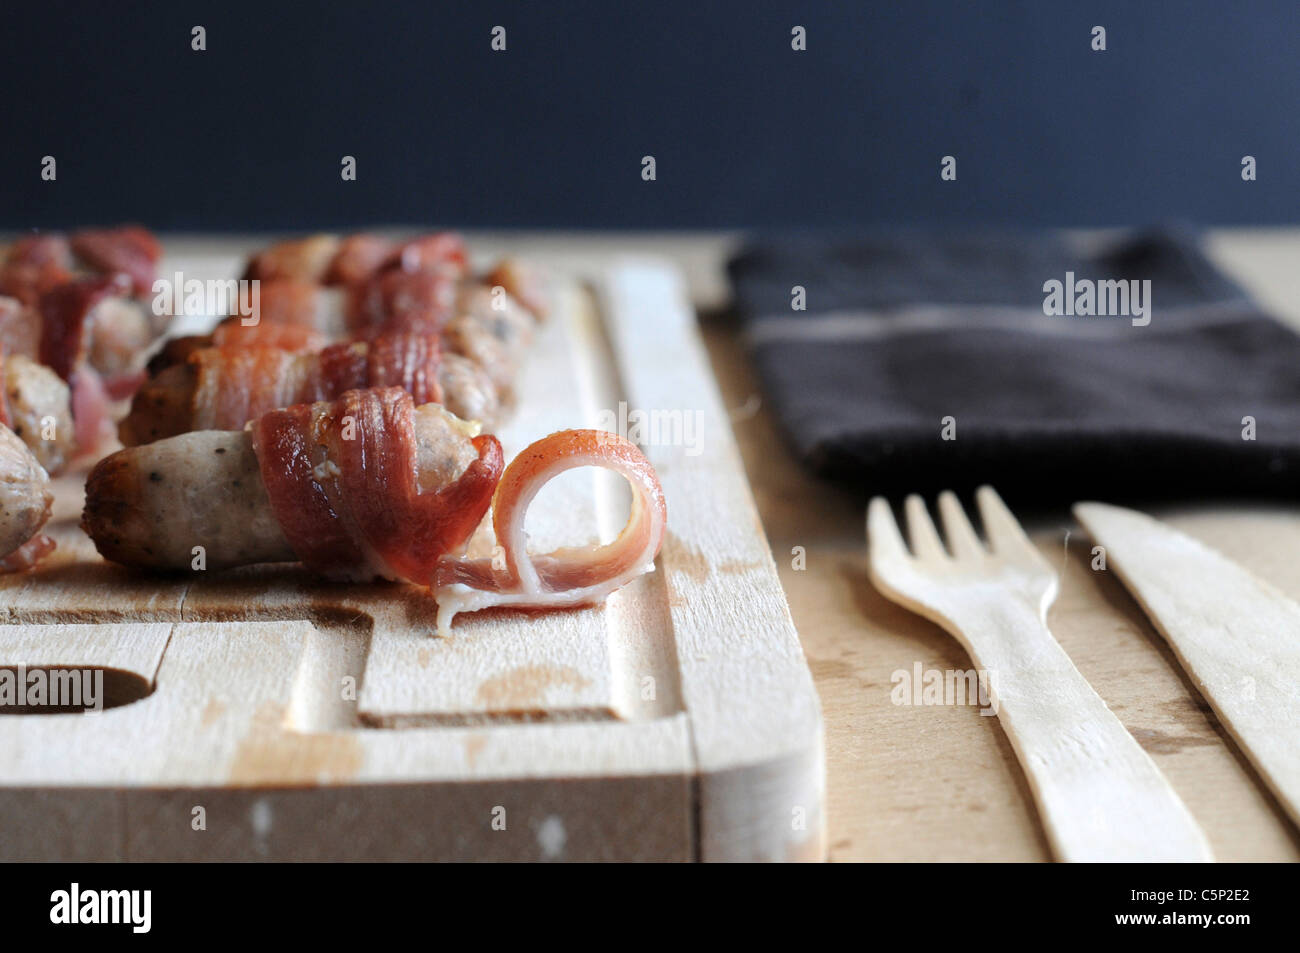 Cocktail sausage wrapped in bacon Stock Photo